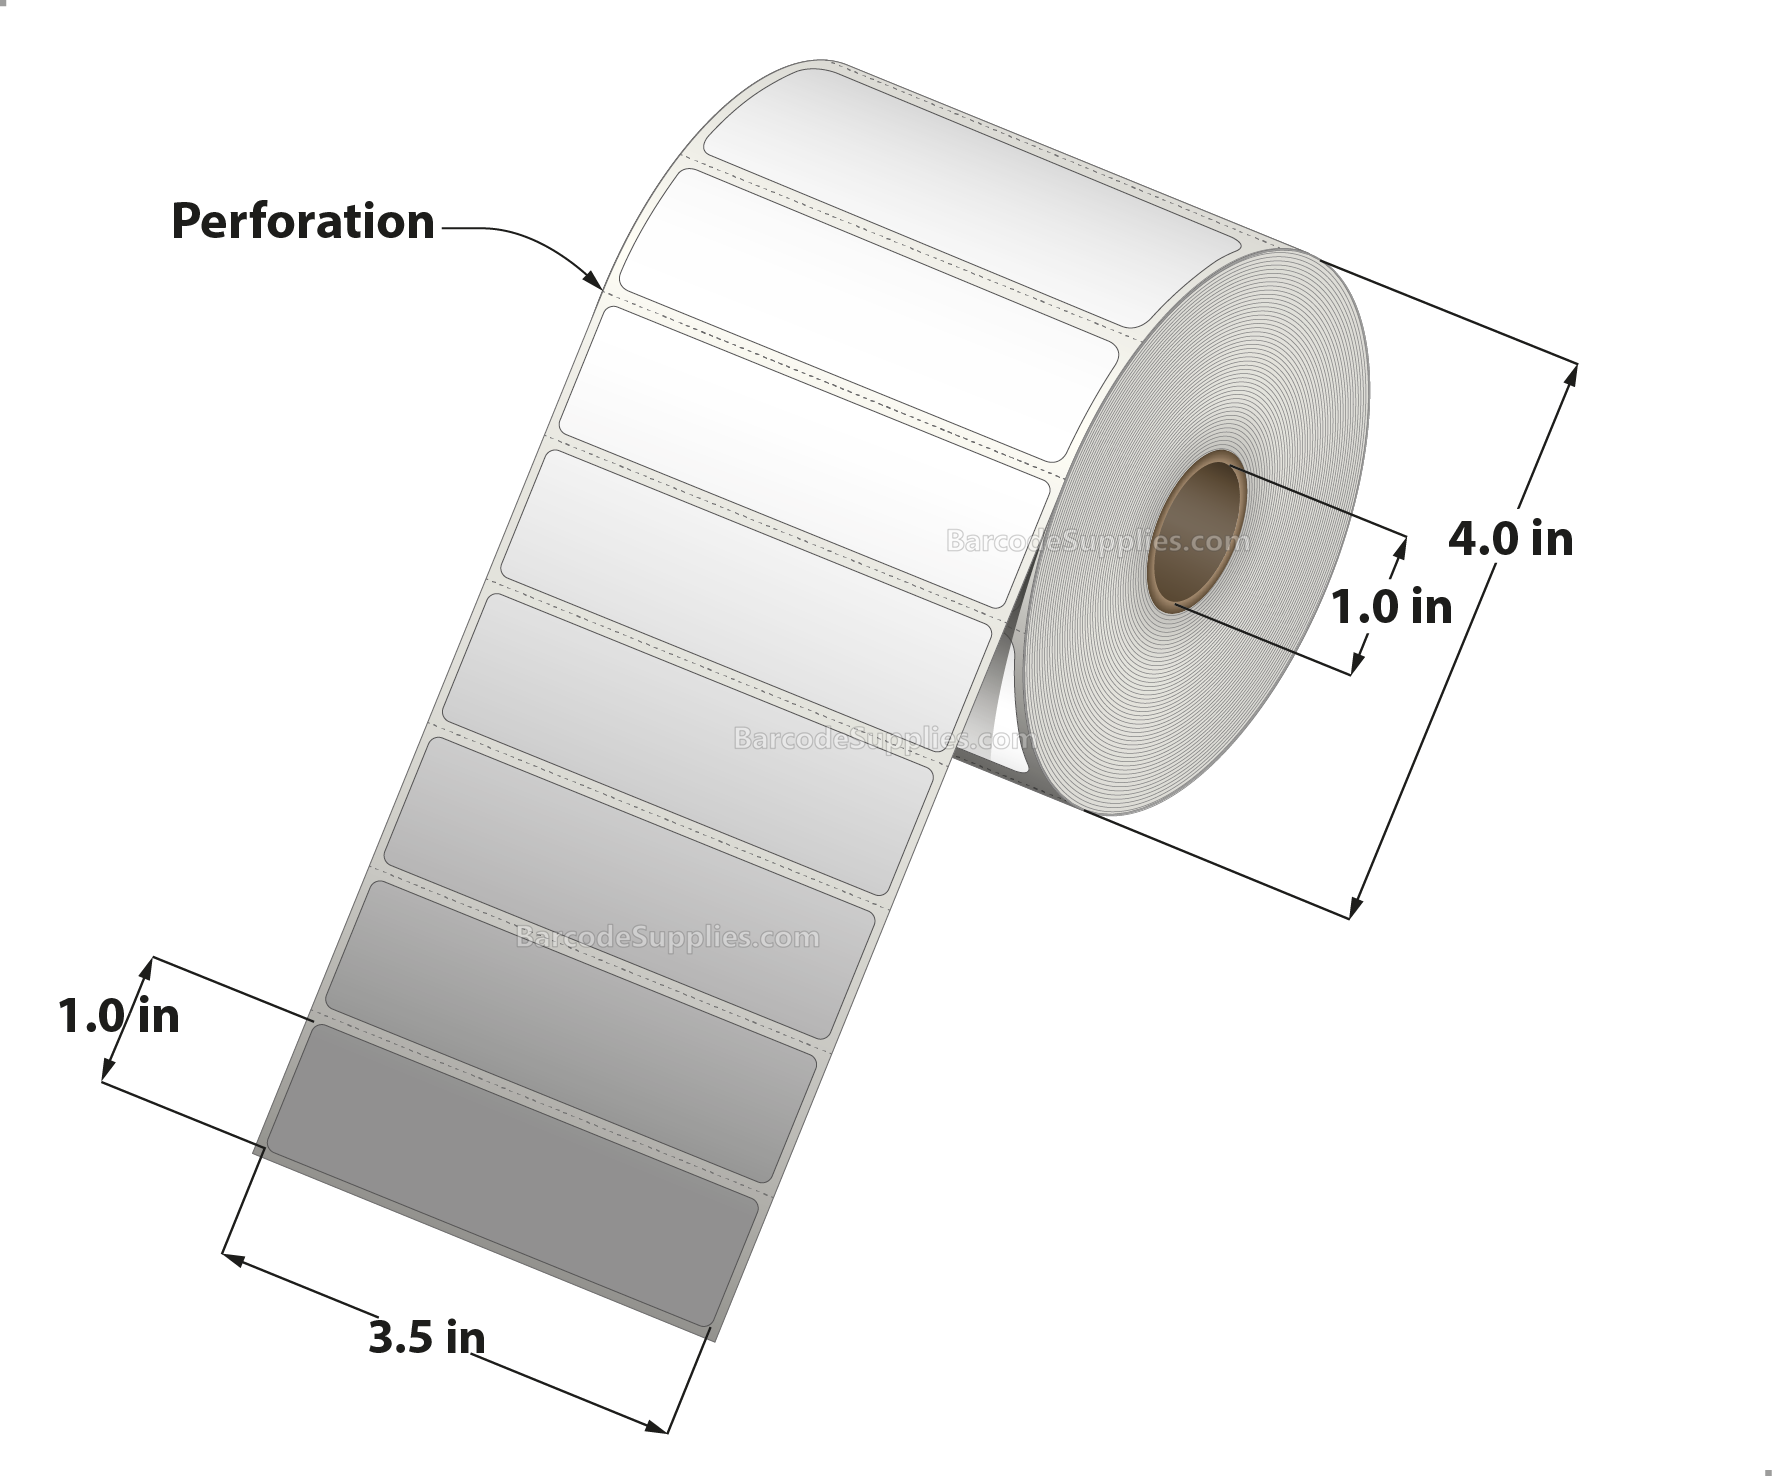 3.5 x 1 Thermal Transfer White Labels With Permanent Acrylic Adhesive - Perforated - 1310 Labels Per Roll - Carton Of 4 Rolls - 5240 Labels Total - MPN: TH351-14PTT